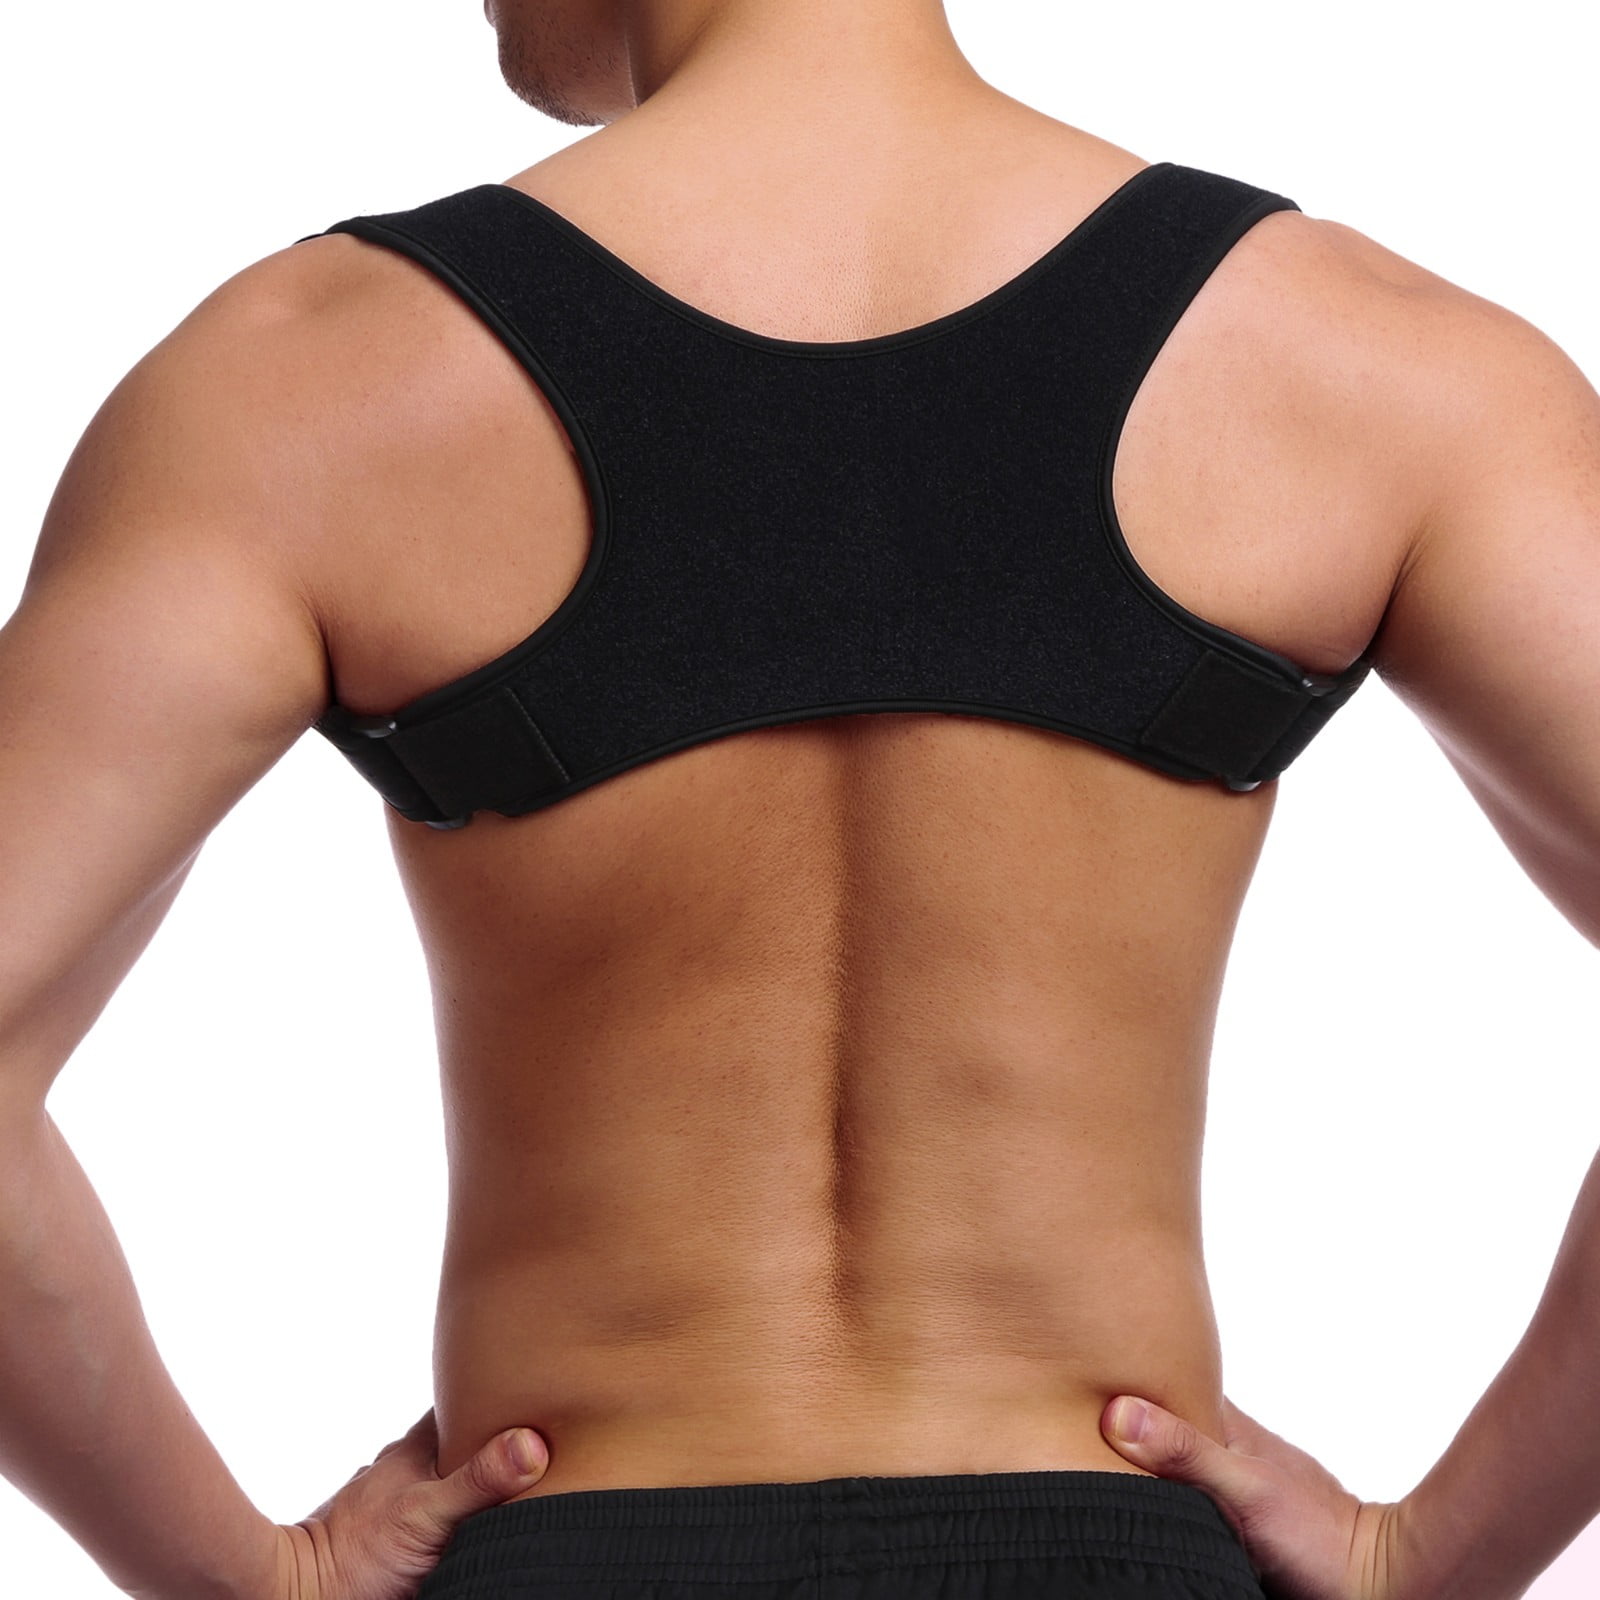 Postural Problems Relieve Neck Pain for Women Men Teenagers Adults Hersvin Shoulder Back Straightener Brace Trainer Clavicle Chest Support to Improve Slouching and Hunching Back Posture Corrector